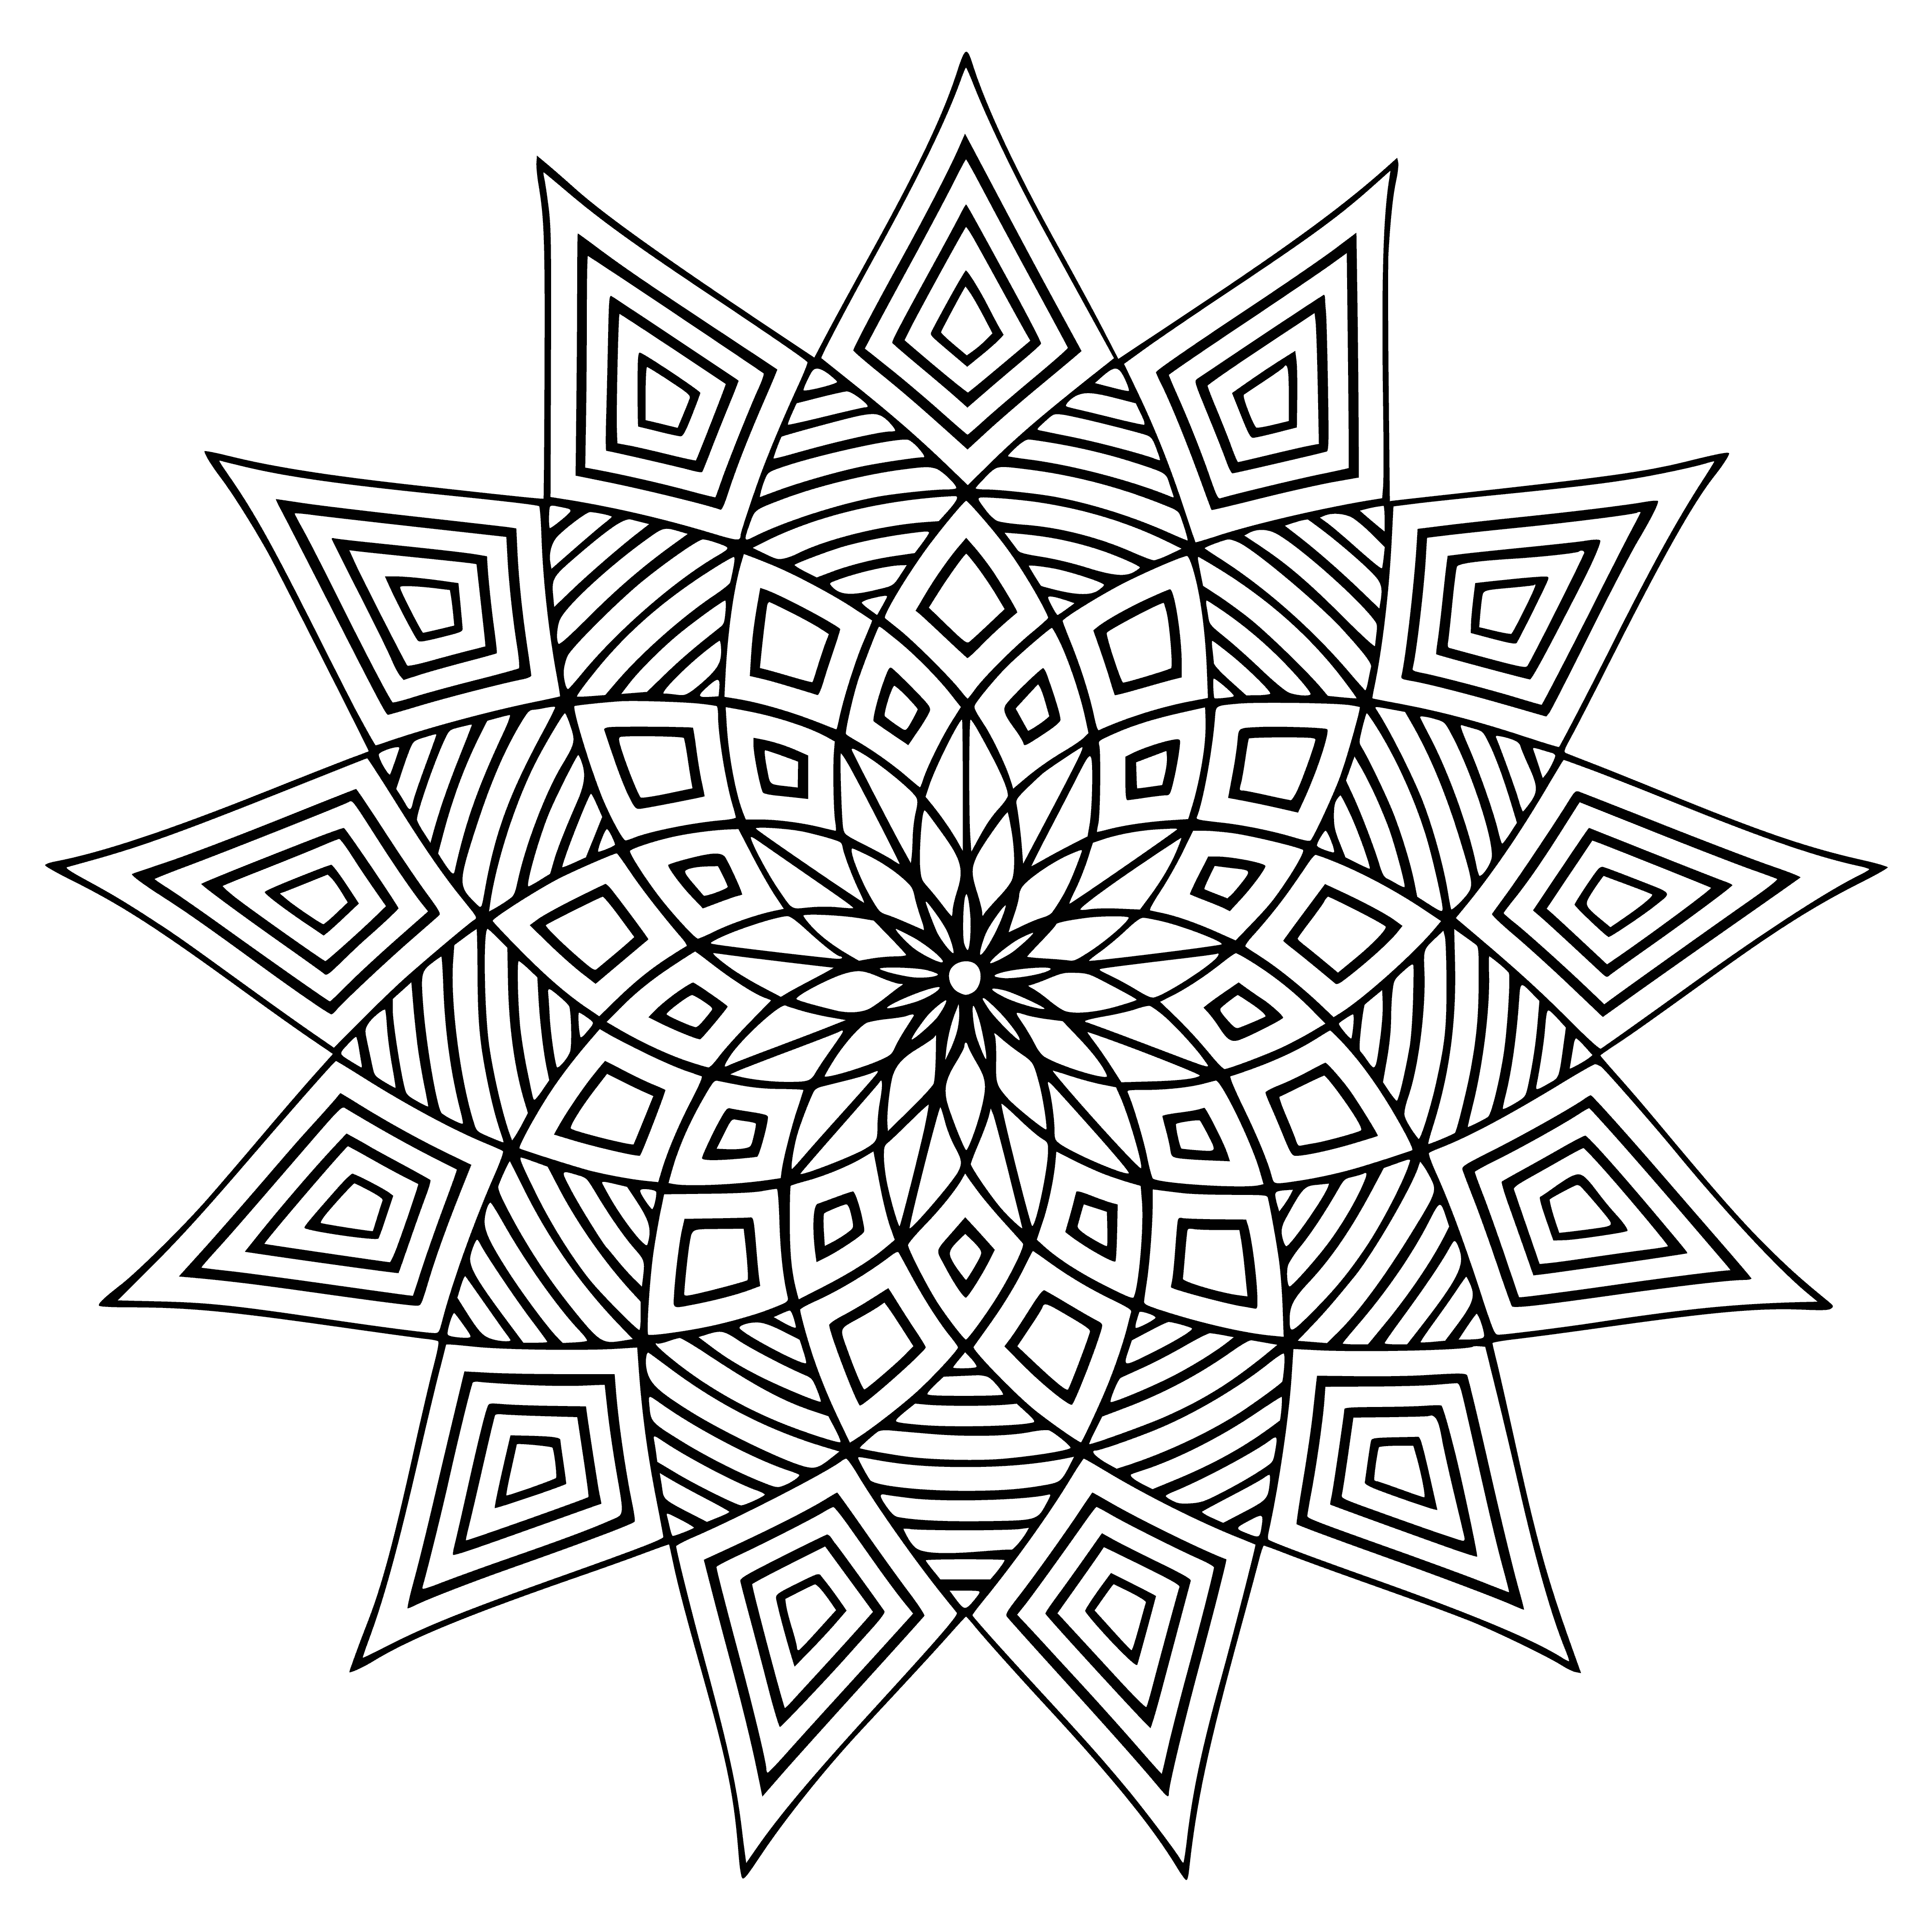 coloring page: Beautiful mandala to color - intricate patterns, spaces to fill in - for a creative & relaxing activity.